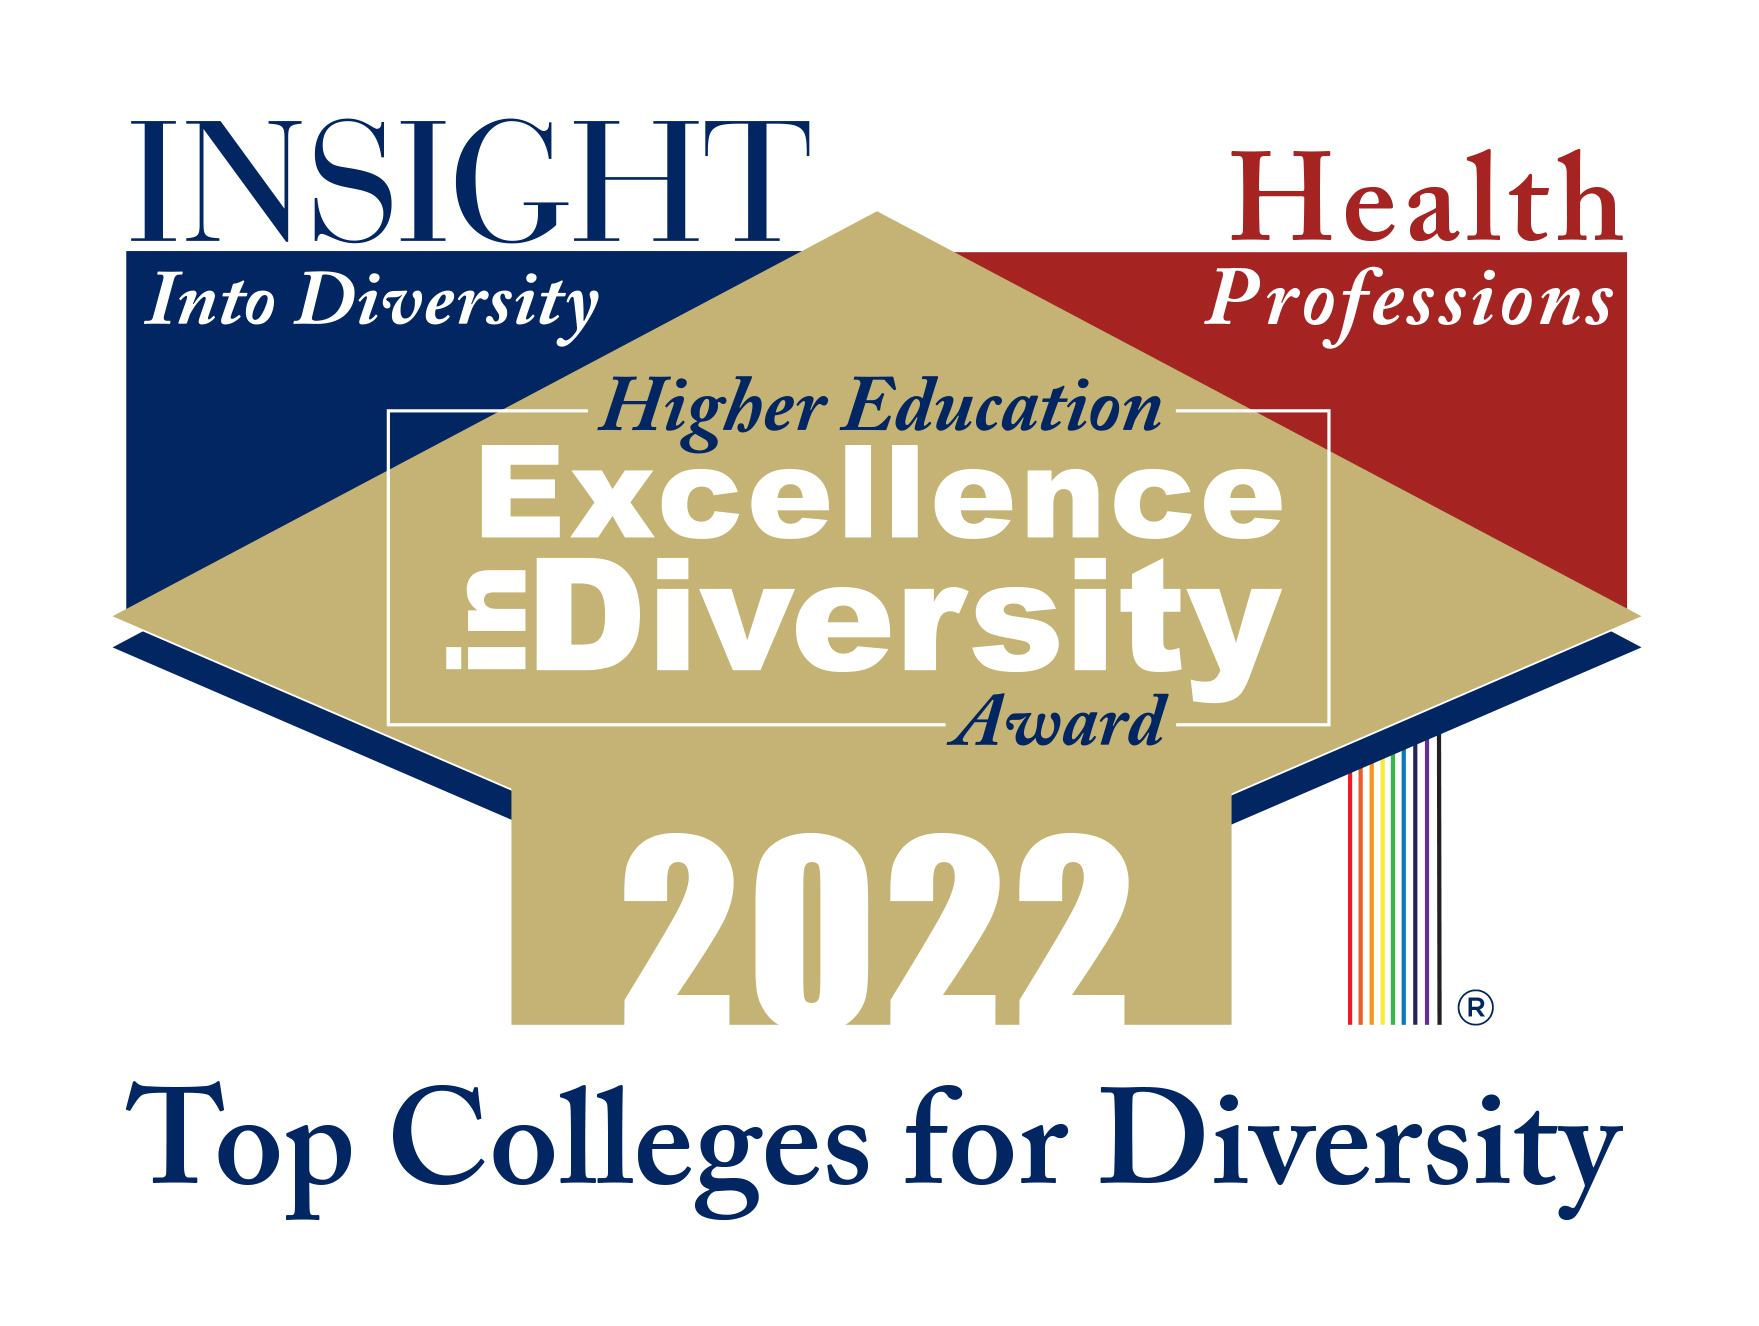 INSIGHT Into Diversity Health Professions Higher Education Excellence -Diversity Award 2022